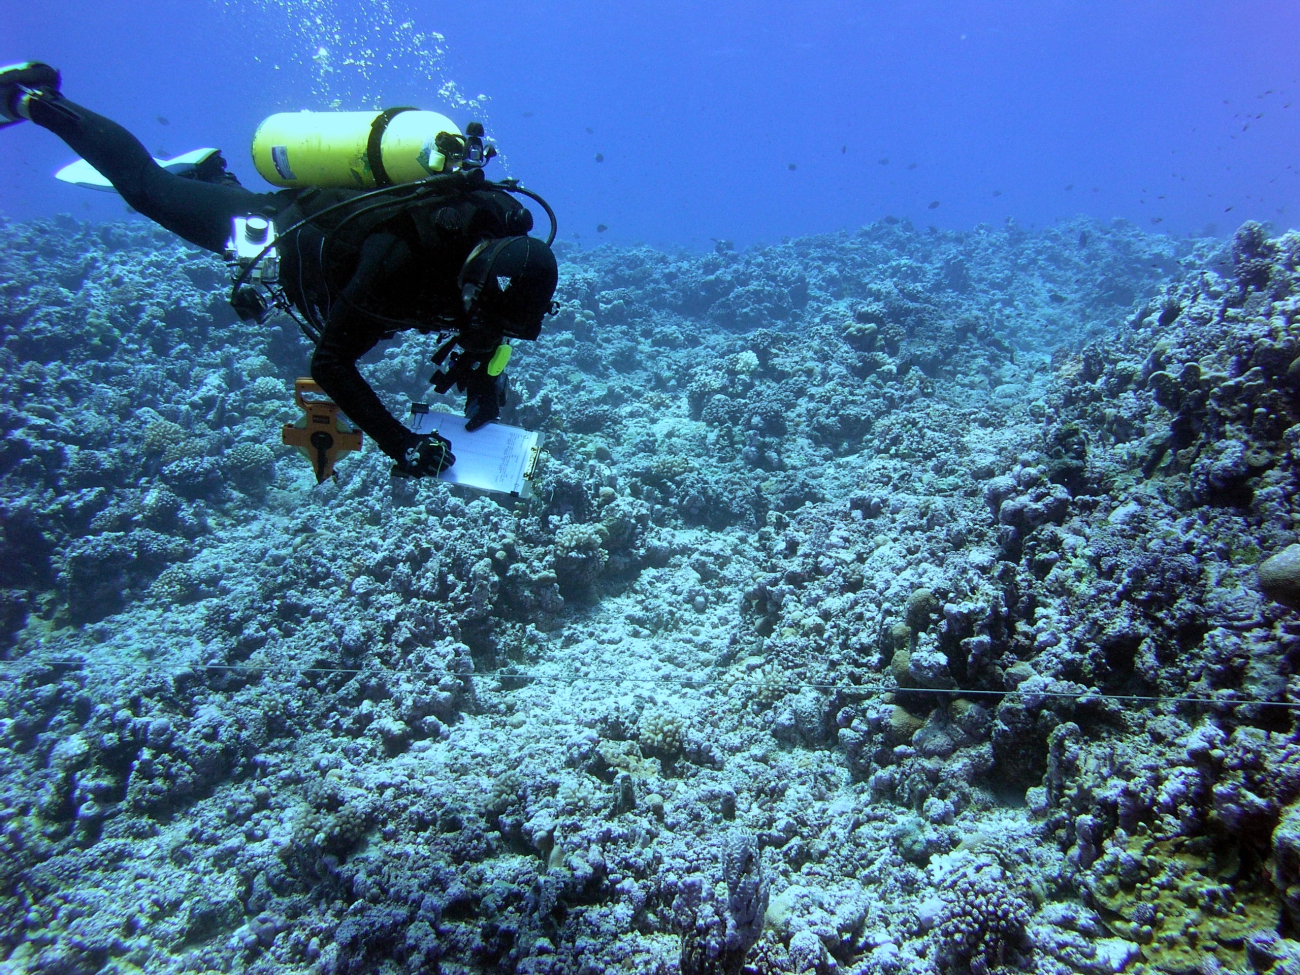 A biologist records substrate composition along a transect line during anunderwater survey at Rose Atoll